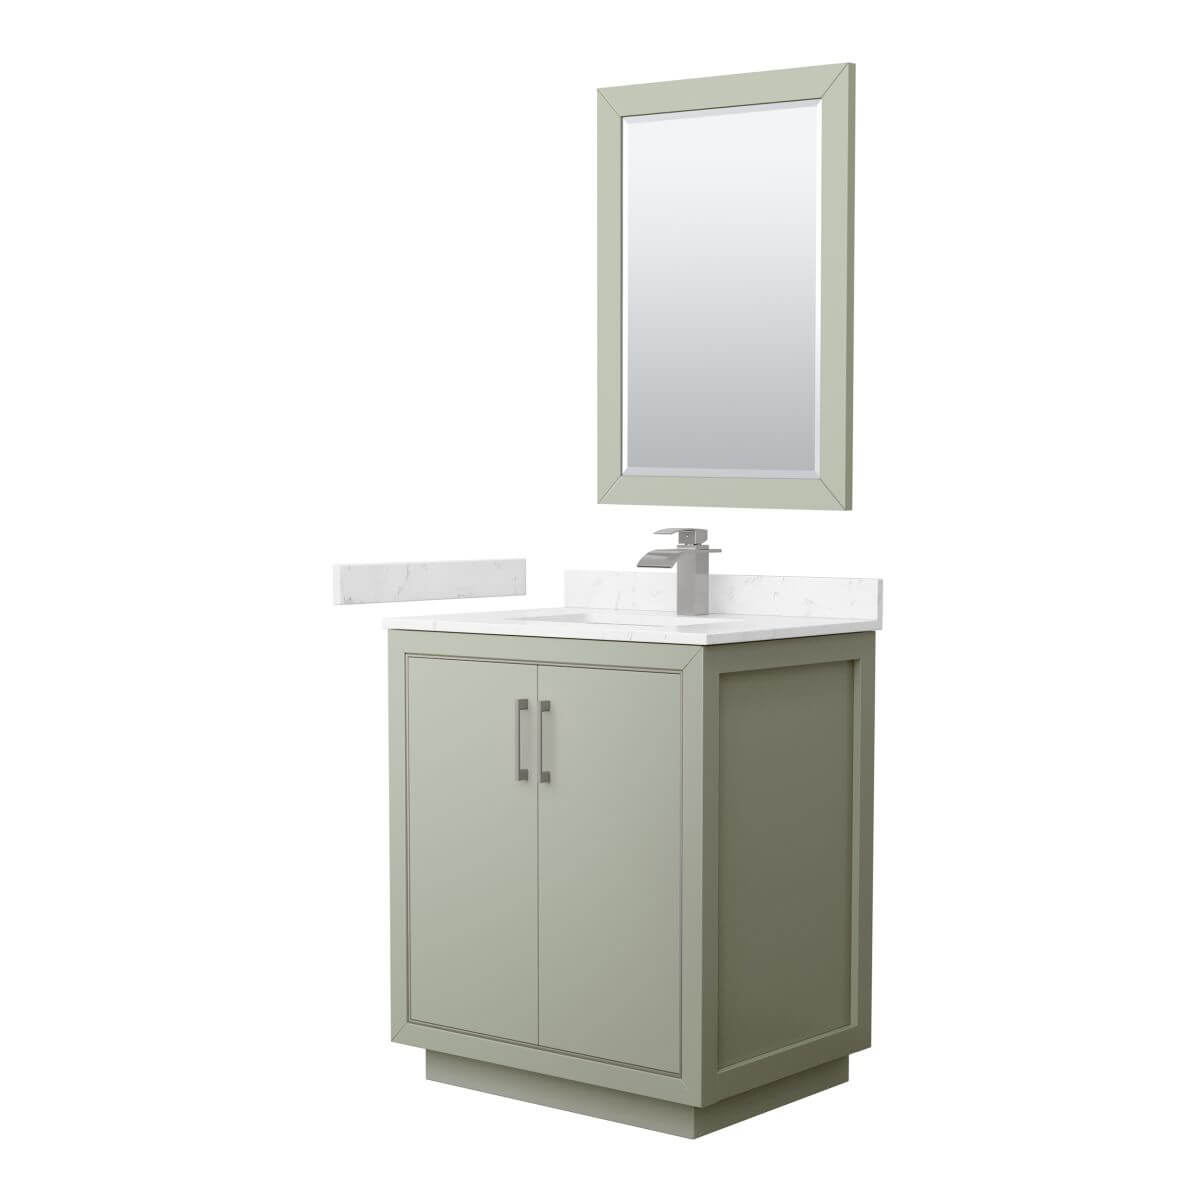 Wyndham Collection WCF111130SLGC2UNSM24 Icon 30 inch Single Bathroom Vanity in Light Green with Carrara Cultured Marble Countertop, Undermount Square Sink, Brushed Nickel Trim and 24 Inch Mirror